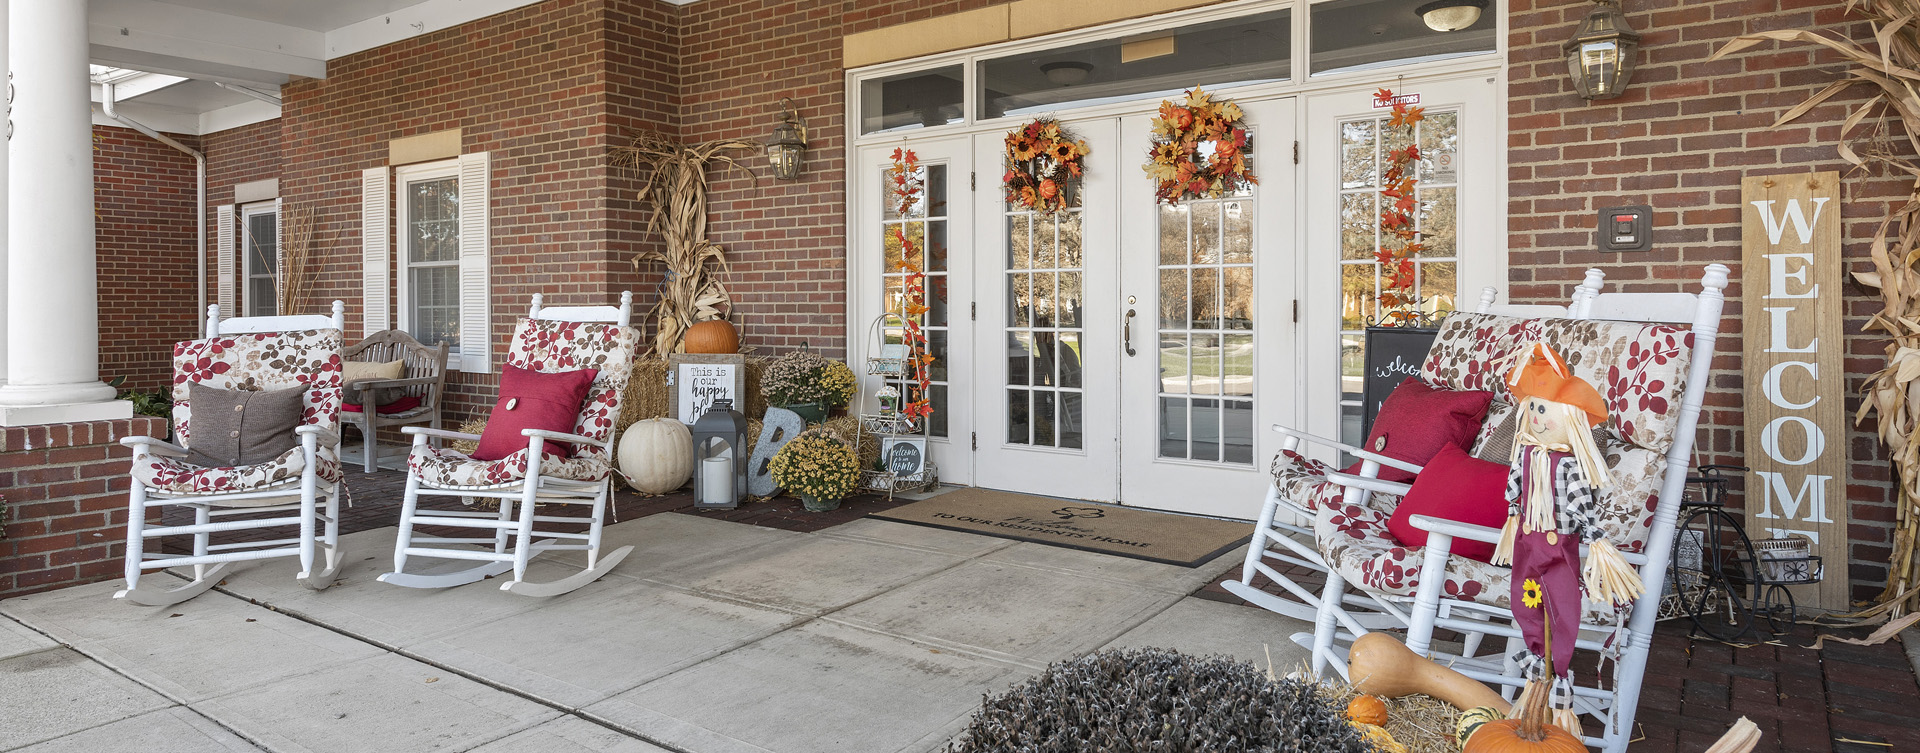 Enjoy conversations with friends on the porch at Bickford of Worthington